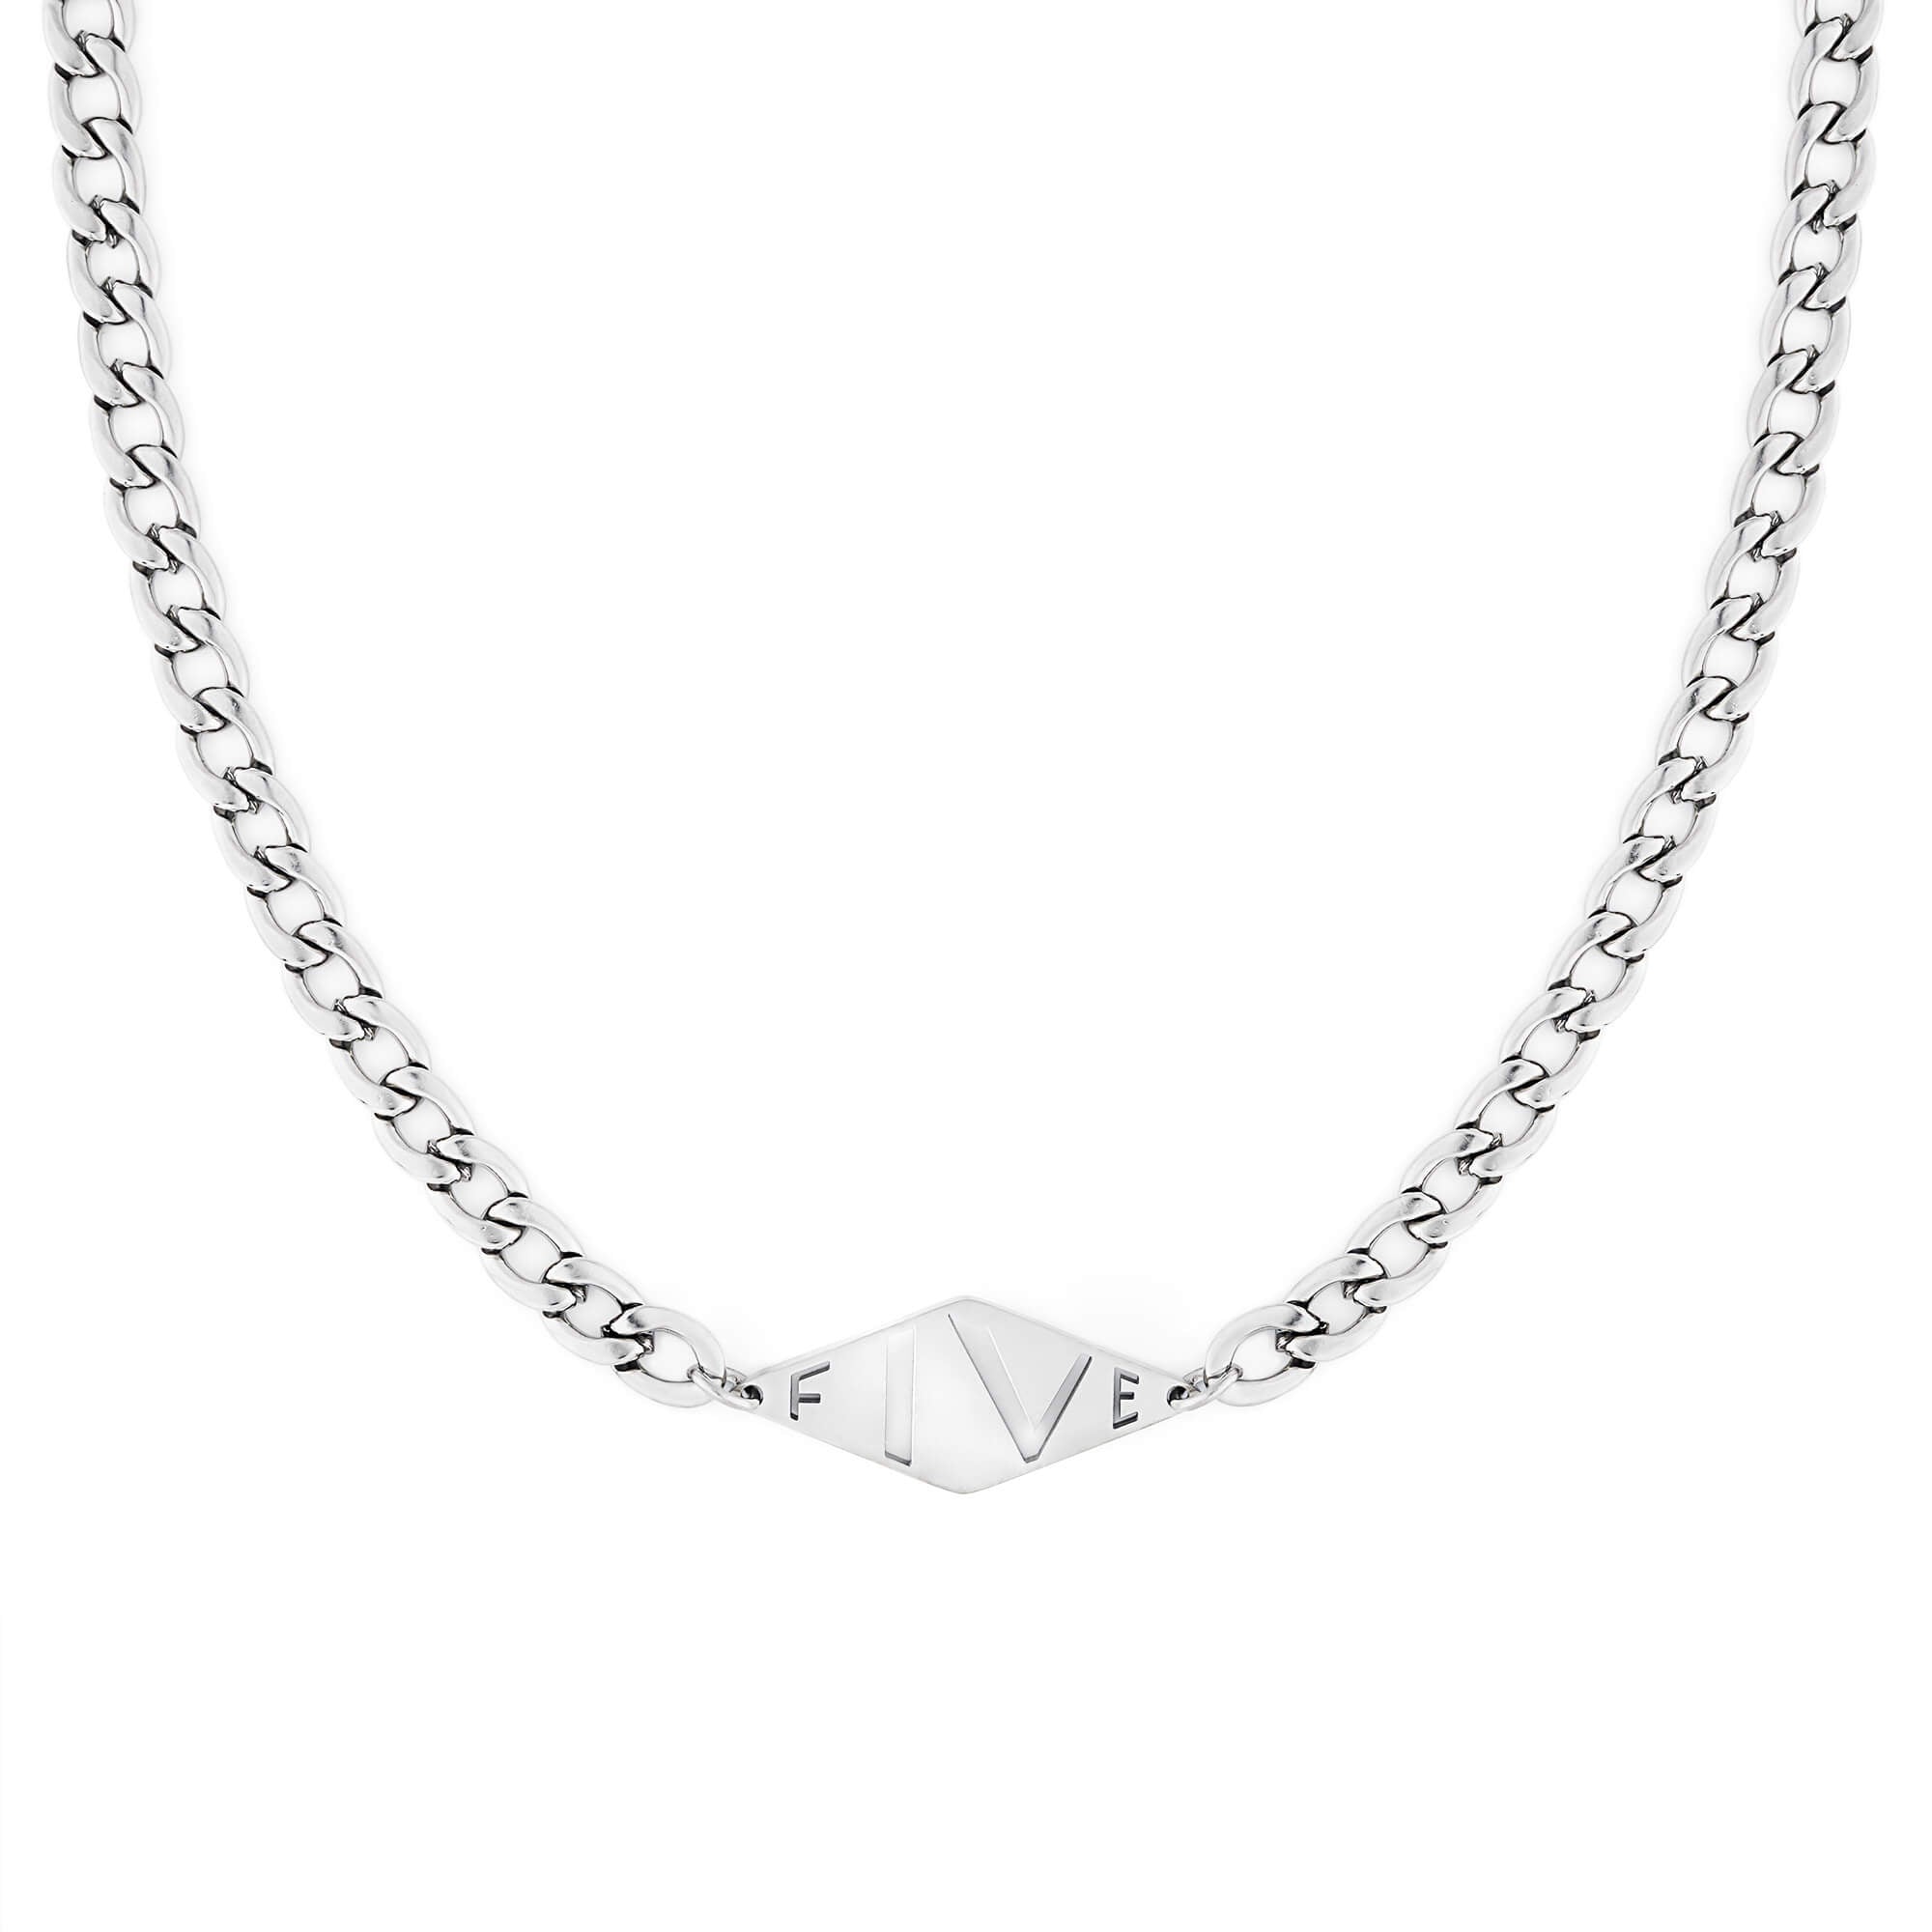 50+ White Gold Chain For Men online in India - Candere by Kalyan Jewellers